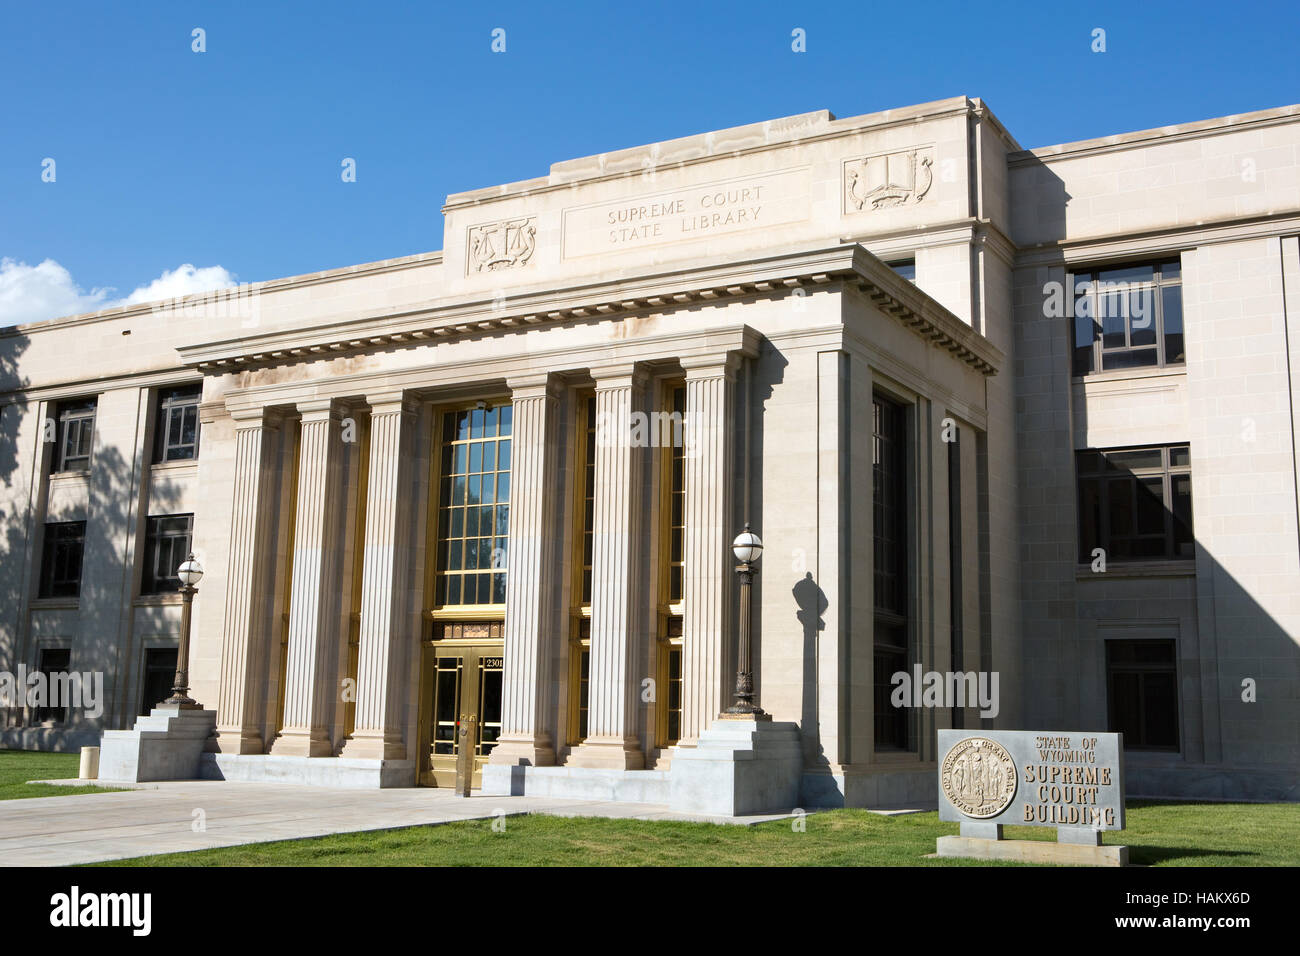 The state of Wyoming Supreme Court building is located in Cheyenne, WY, USA. Stock Photo